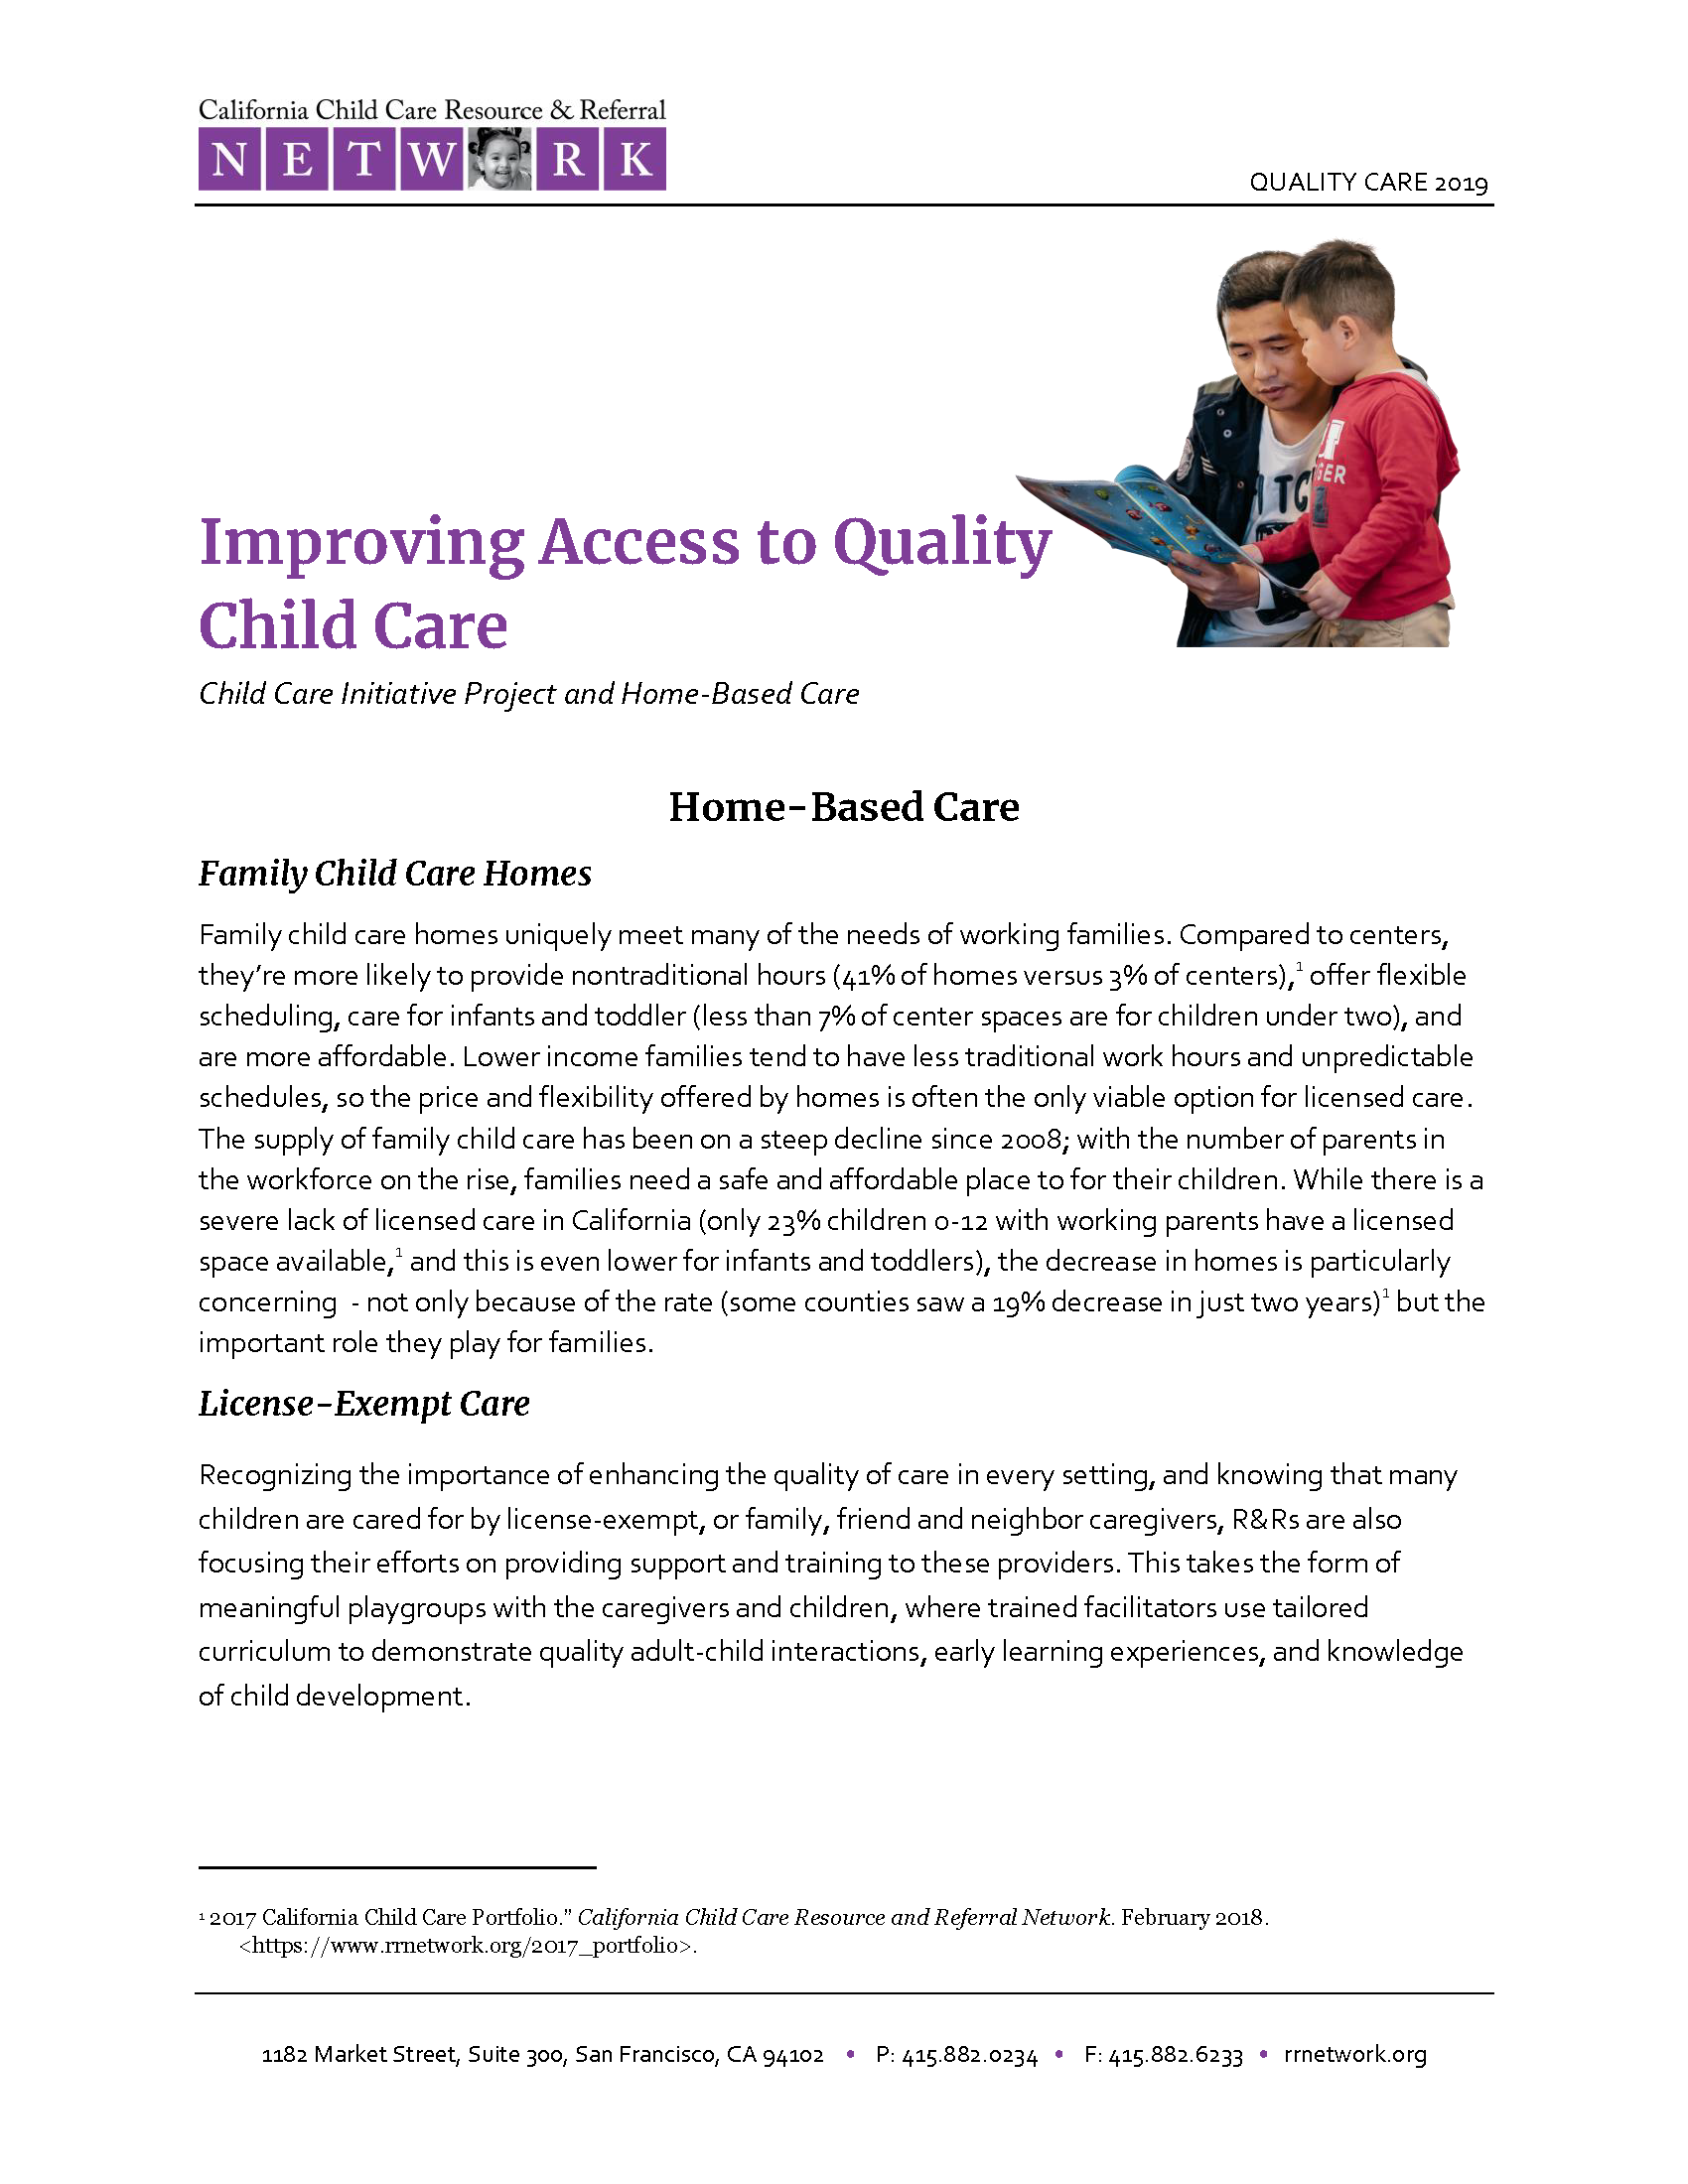 Improving Access to Quality Child Care